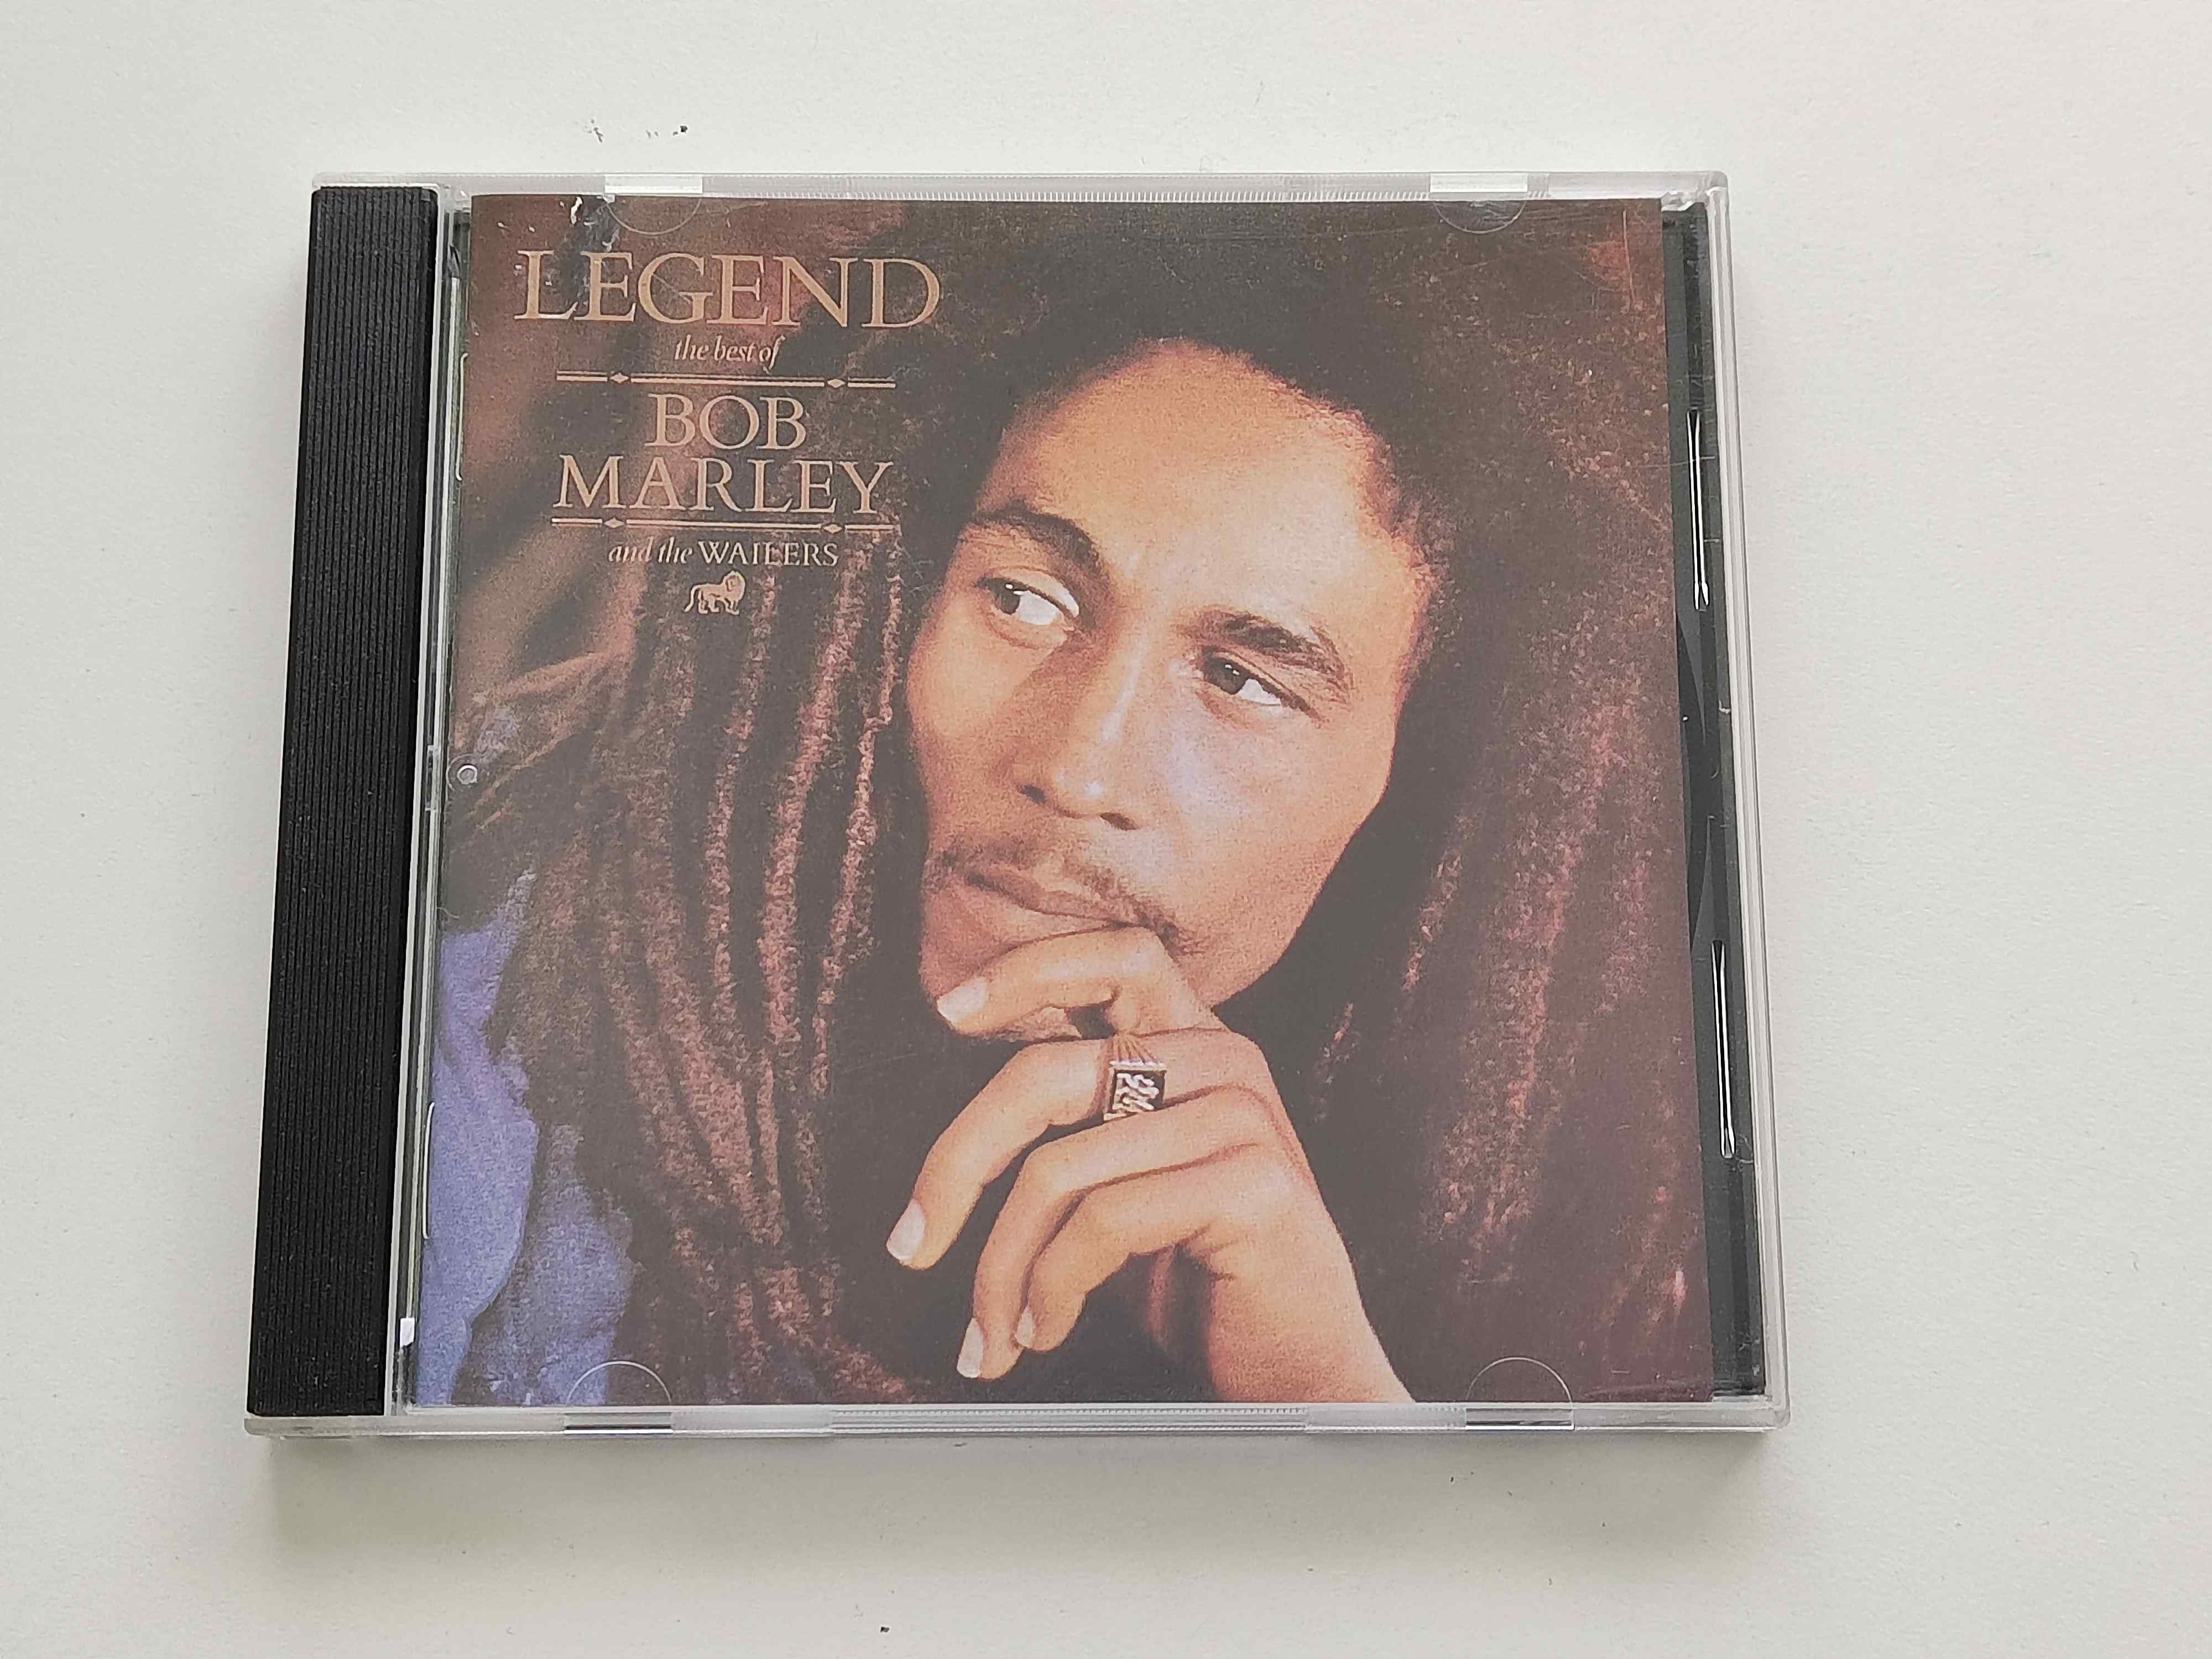 Legend - The Best Of Bob Marley and the Wailers | CD - Marley, Bob und The Wailers